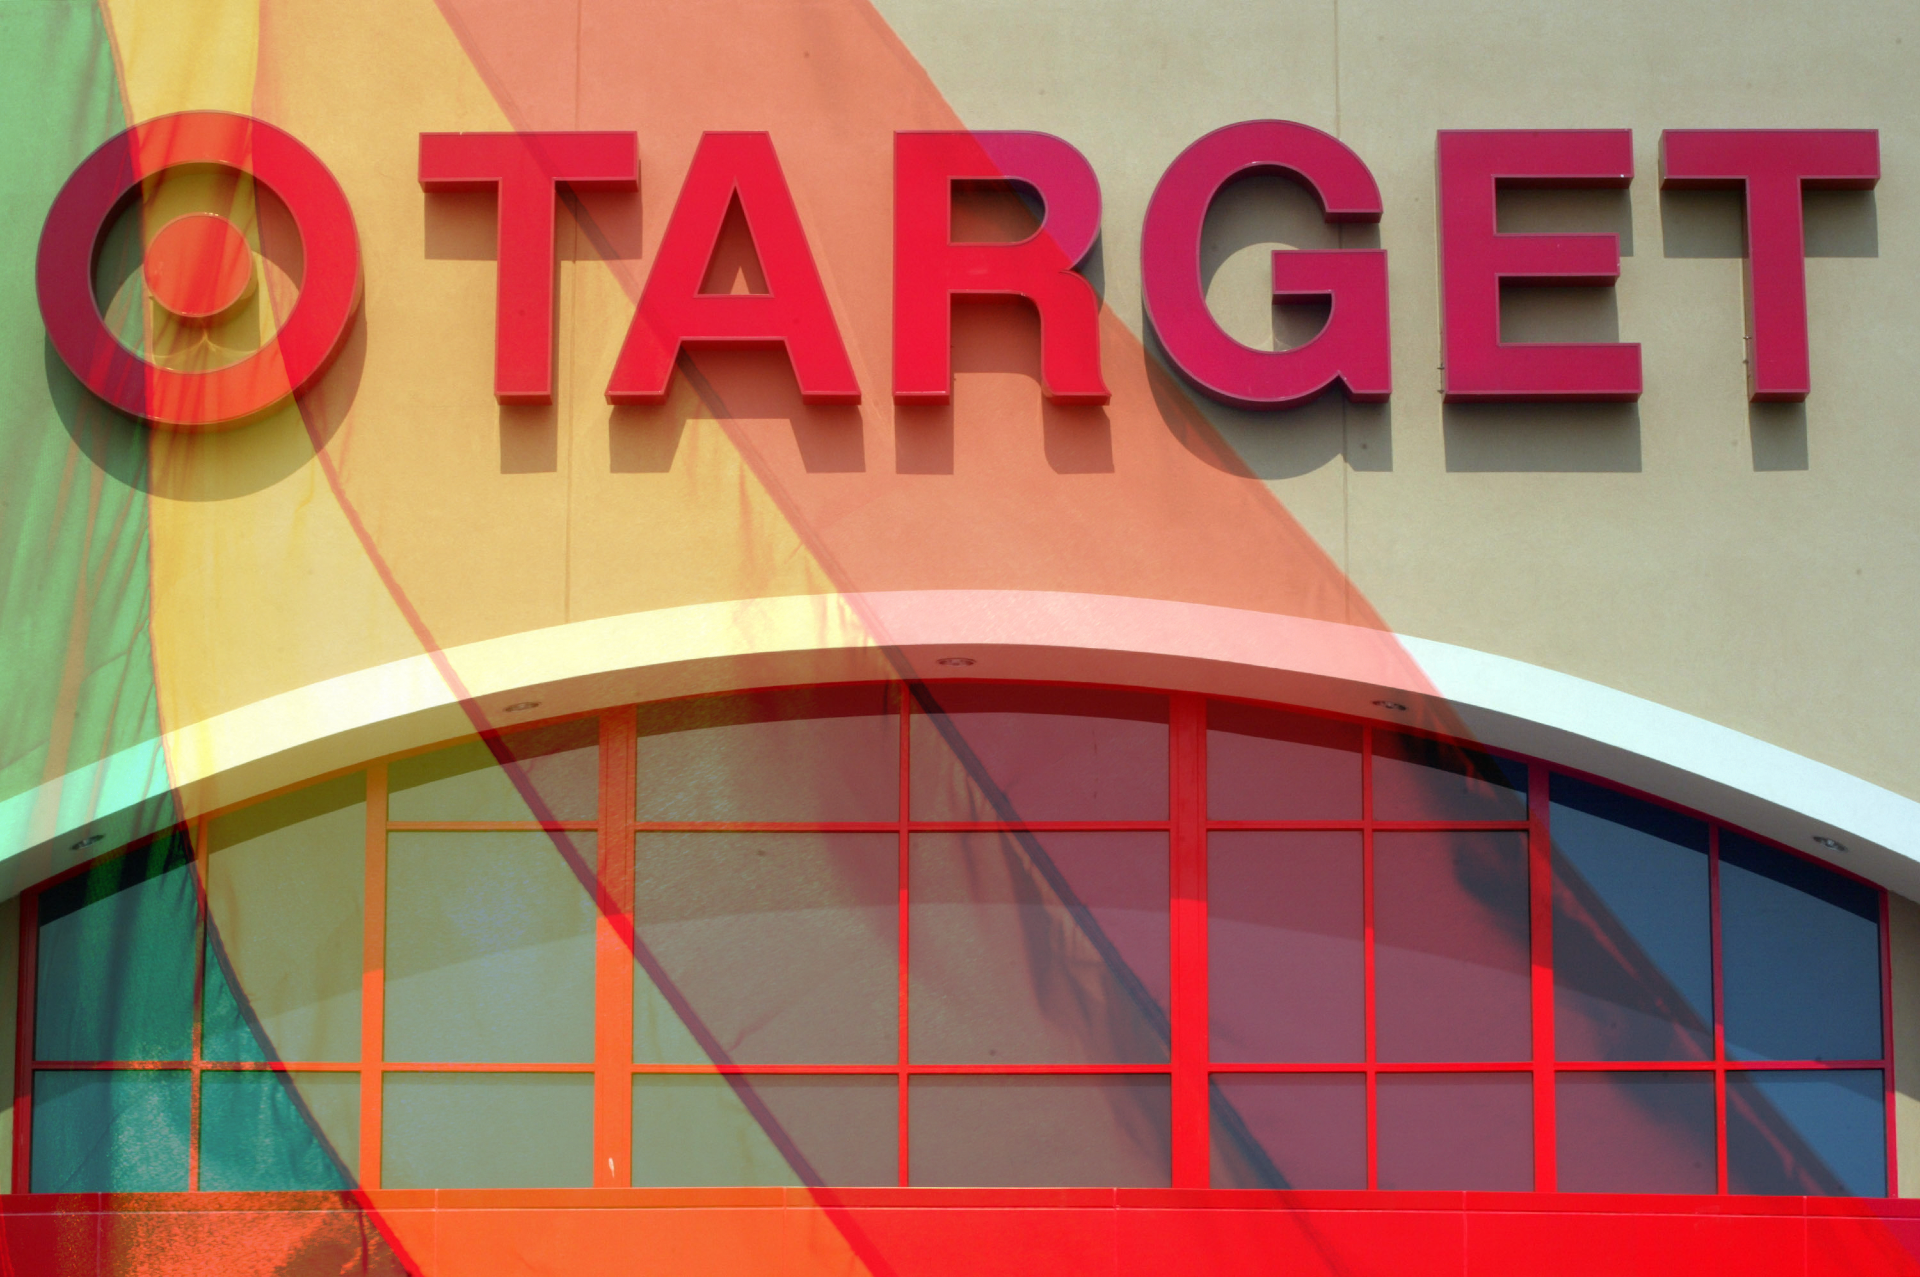 Target latest company to suffer backlash for LGBTQ+ support, pulls some  Pride month clothing